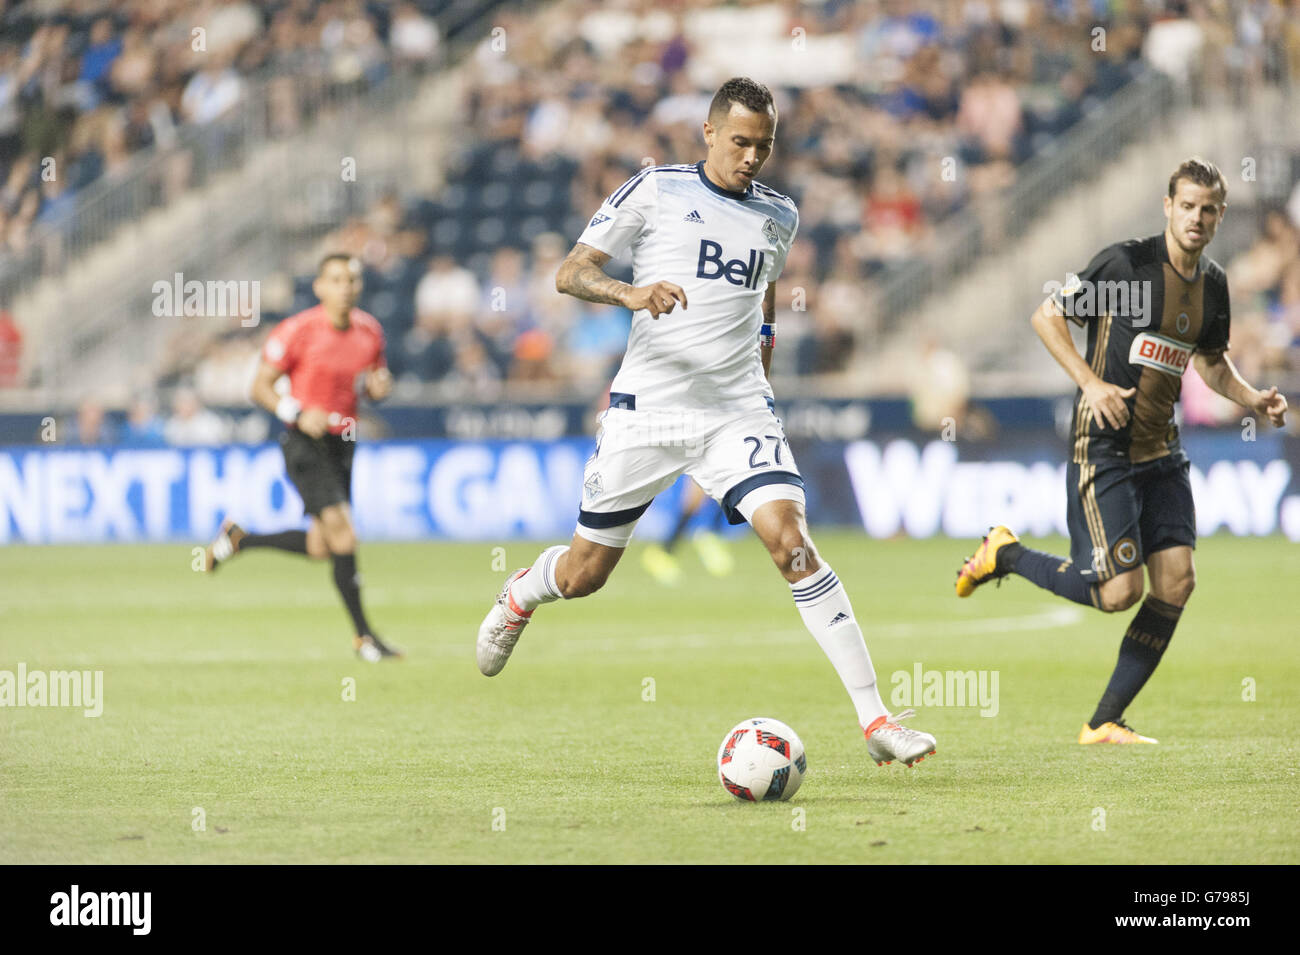 Chester, Pennsylvania, USA. 25th June, 2016. Whitecaps's BLAS PEREZ (27) in action against the Philadelphia Union during the match at Talen Energy Stadium in Chester Pennsylvania © Ricky Fitchett/ZUMA Wire/Alamy Live News Stock Photo